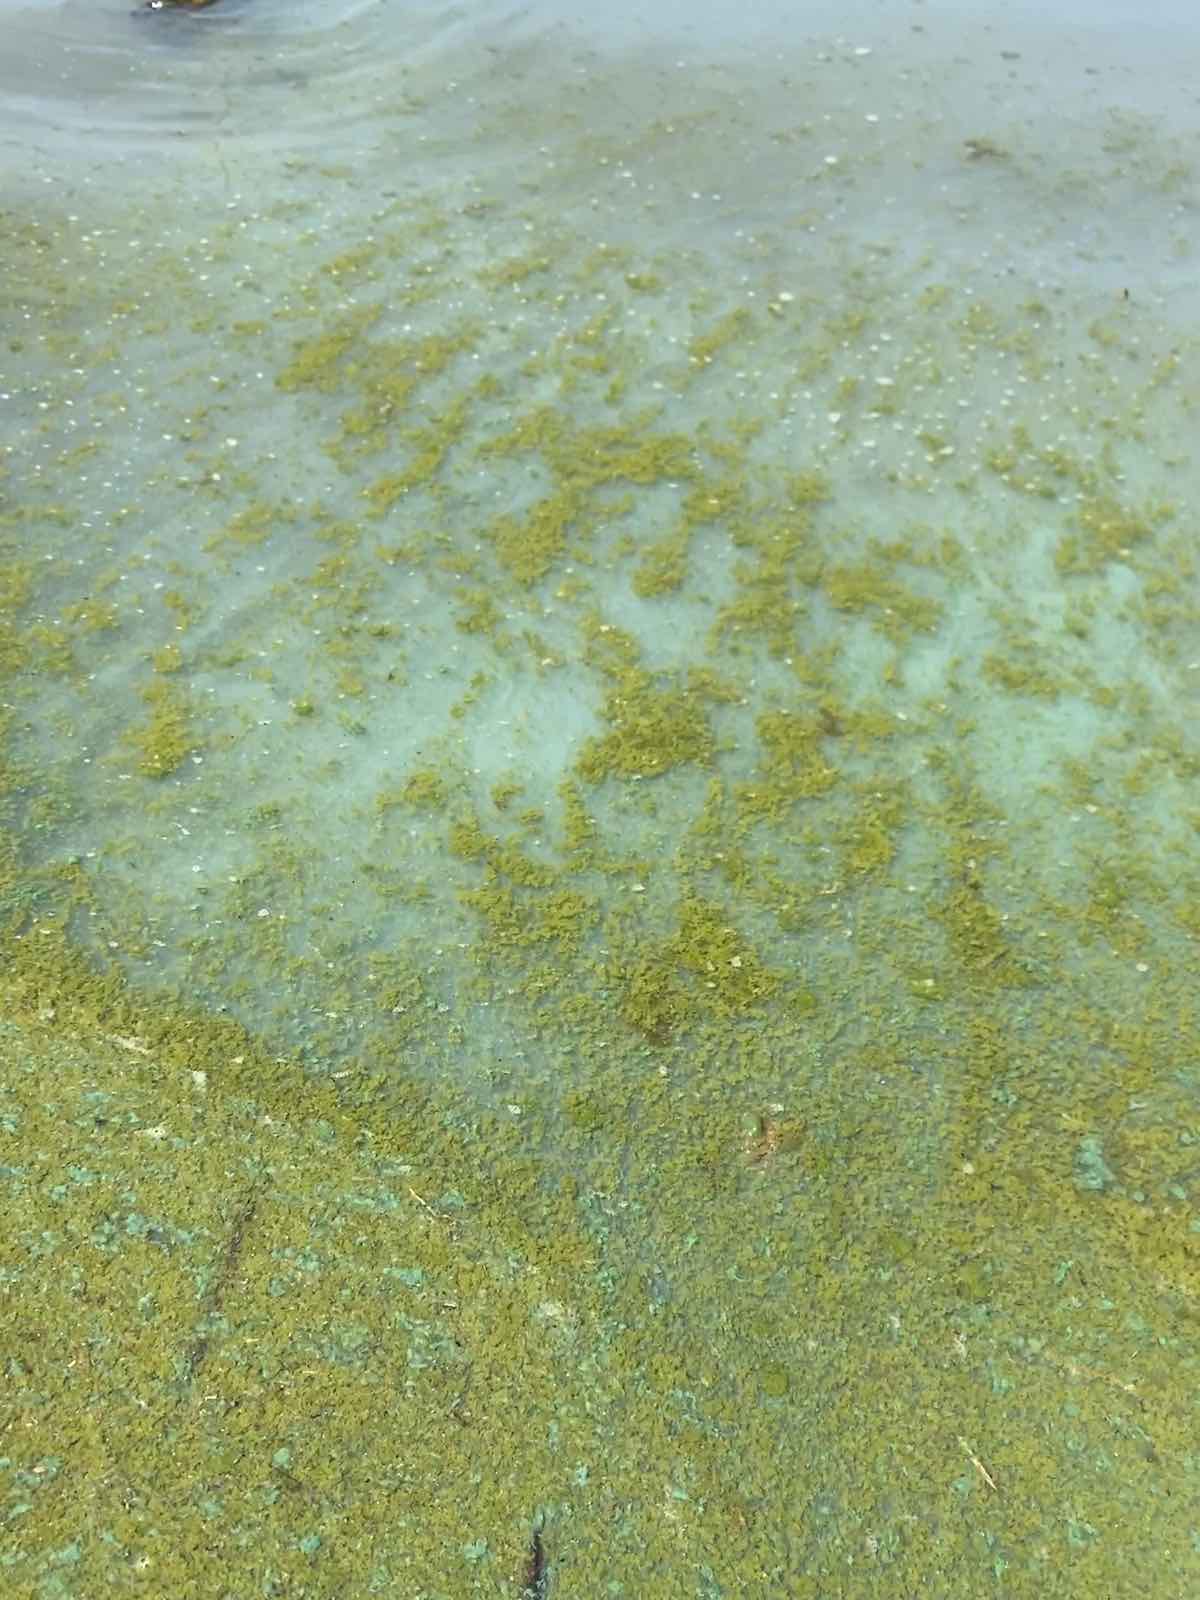 Algae growth on the water's surface